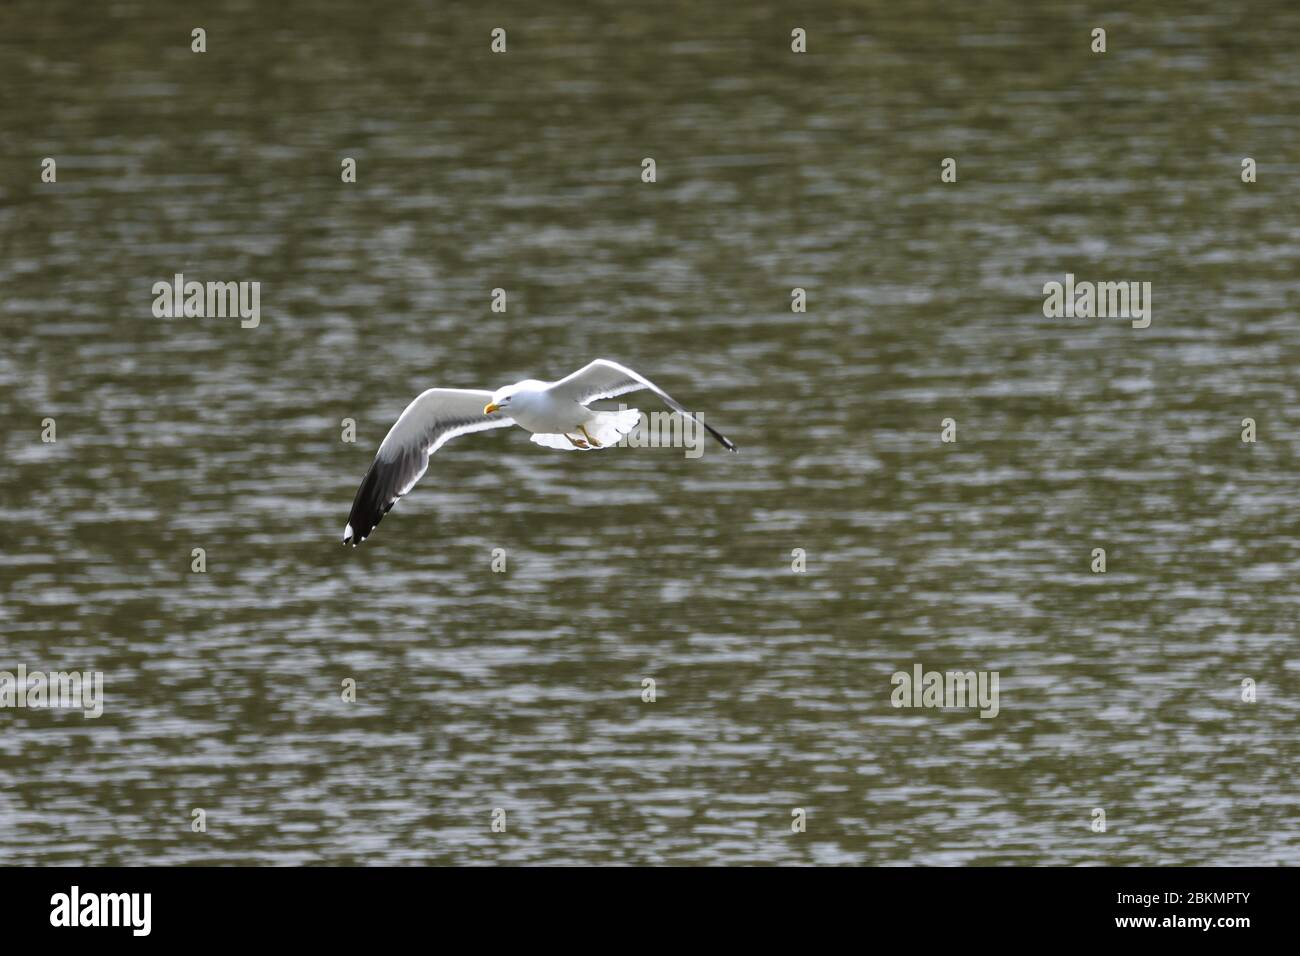 A bird flying with water as the background Stock Photo